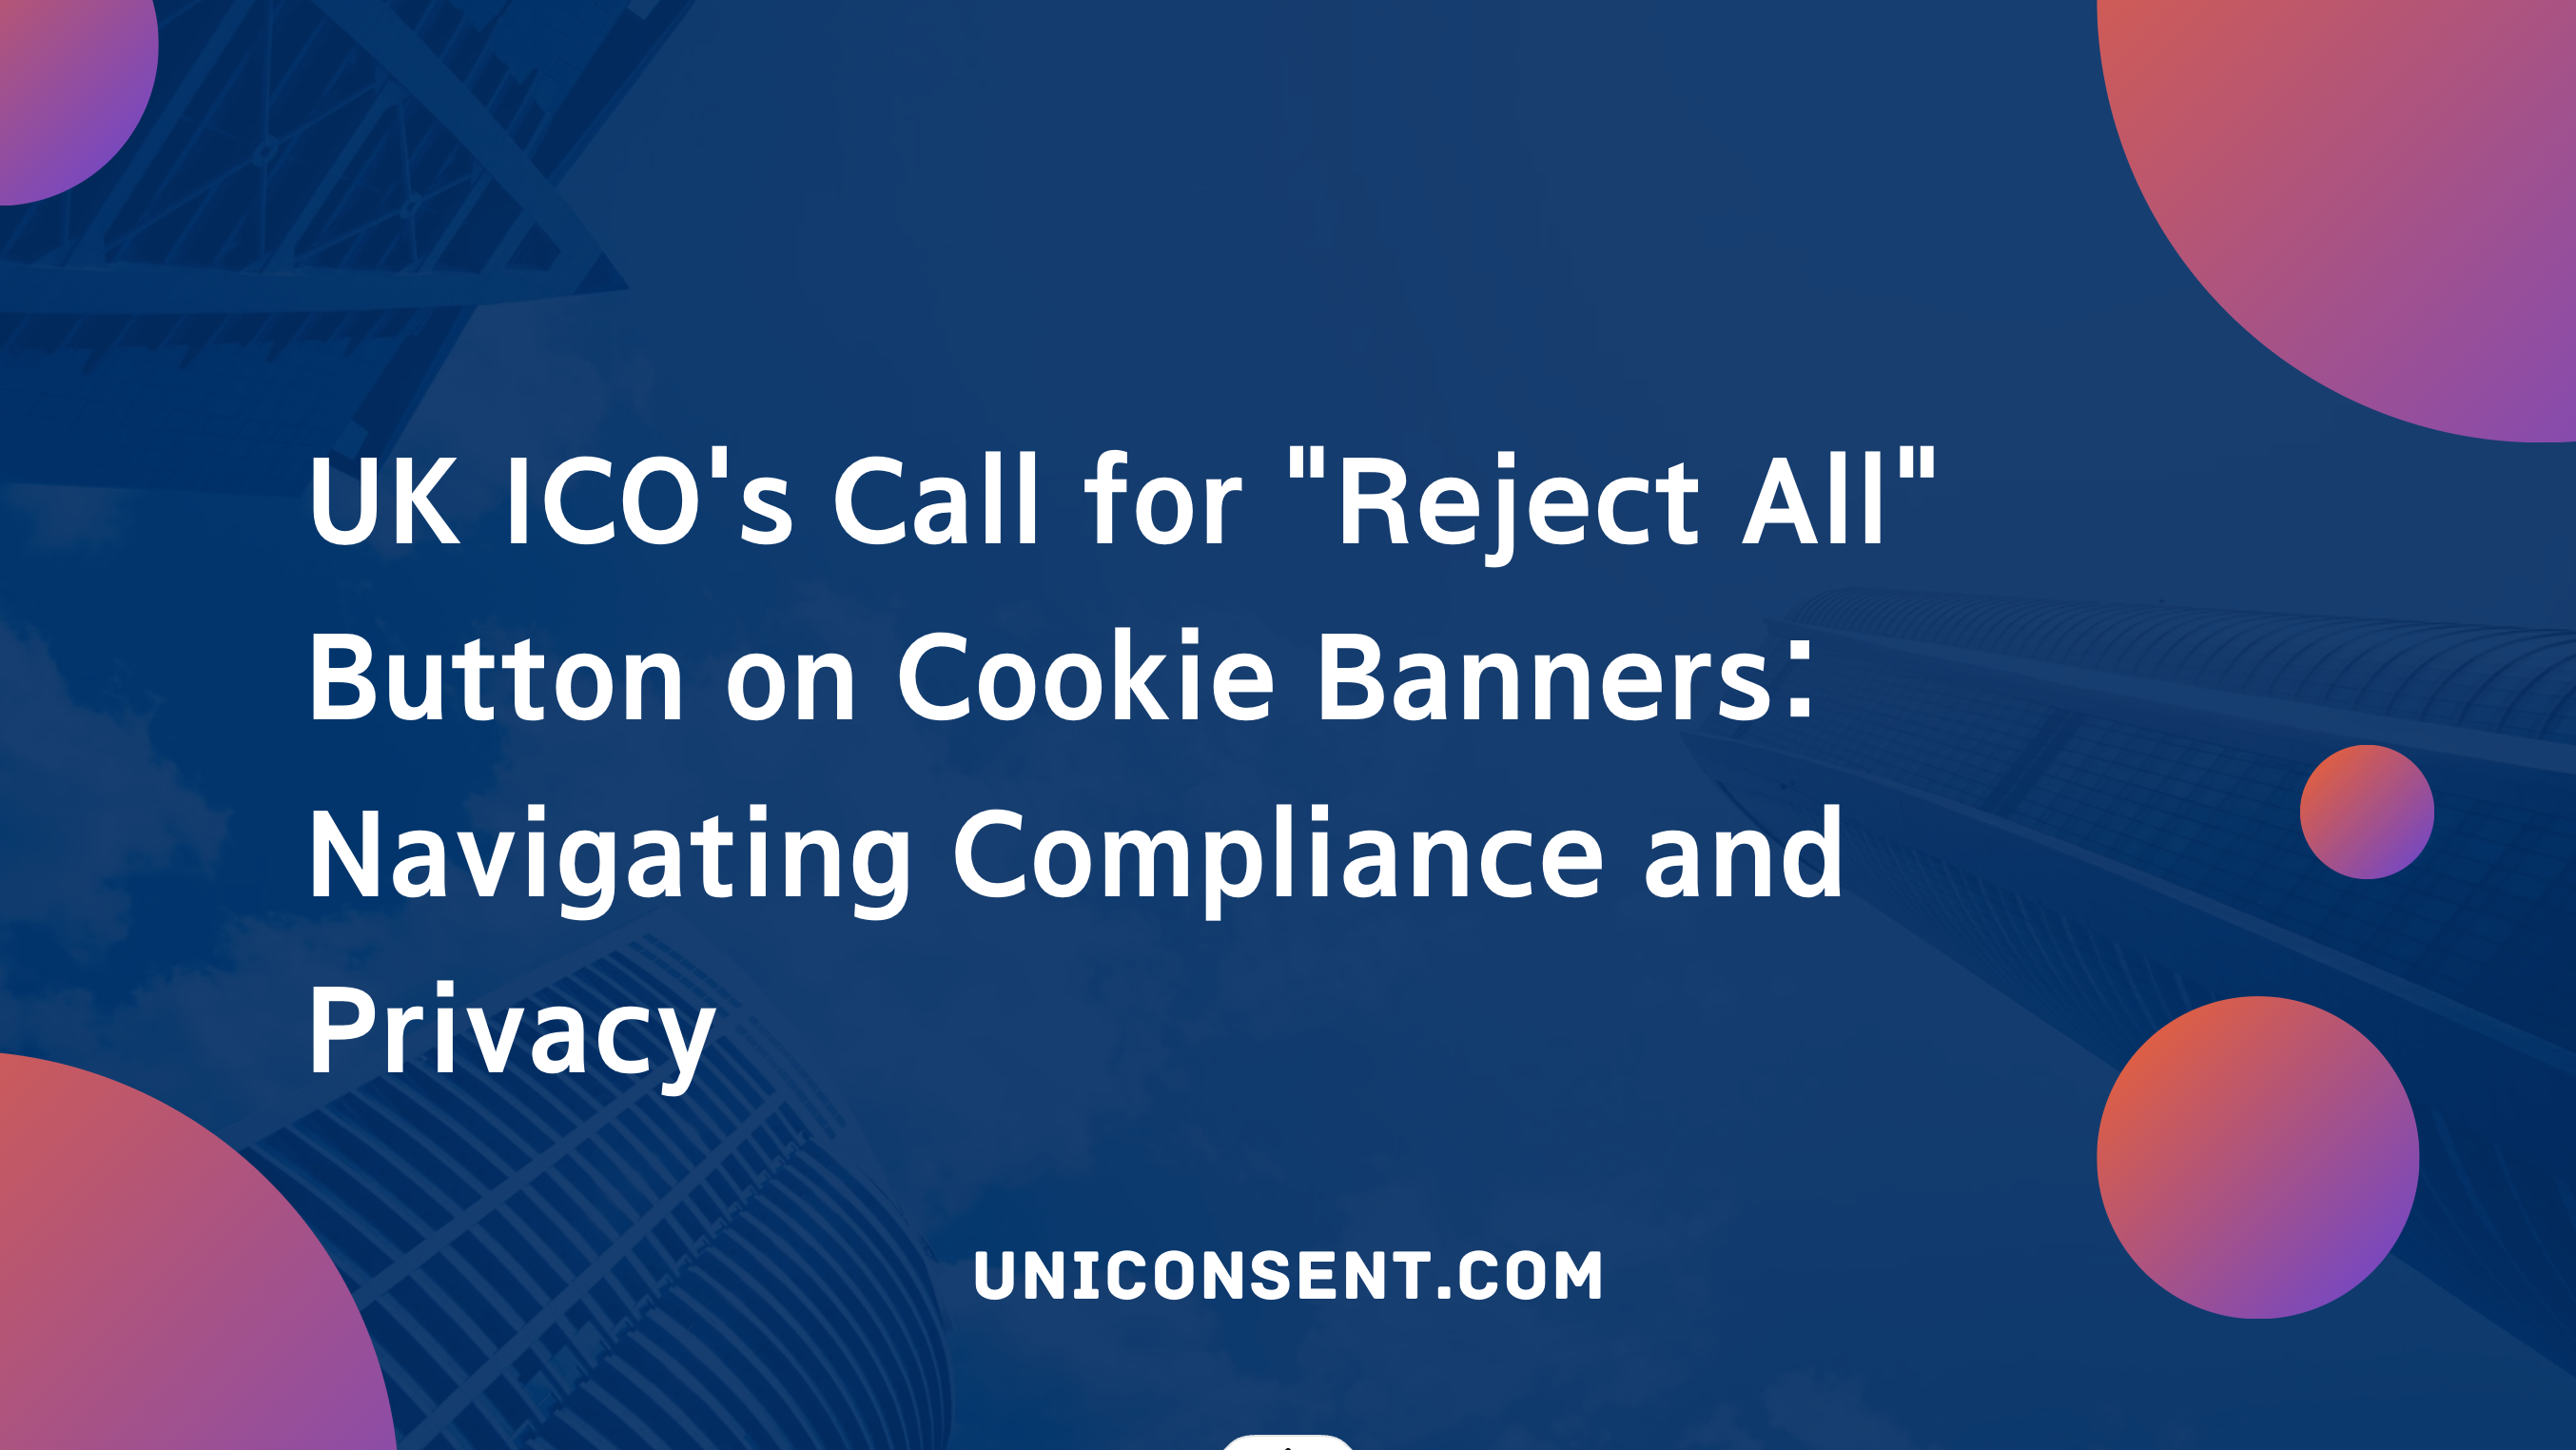 UK ICO's Call for Reject All Button on Cookie Banners: Navigating Compliance and Privacy